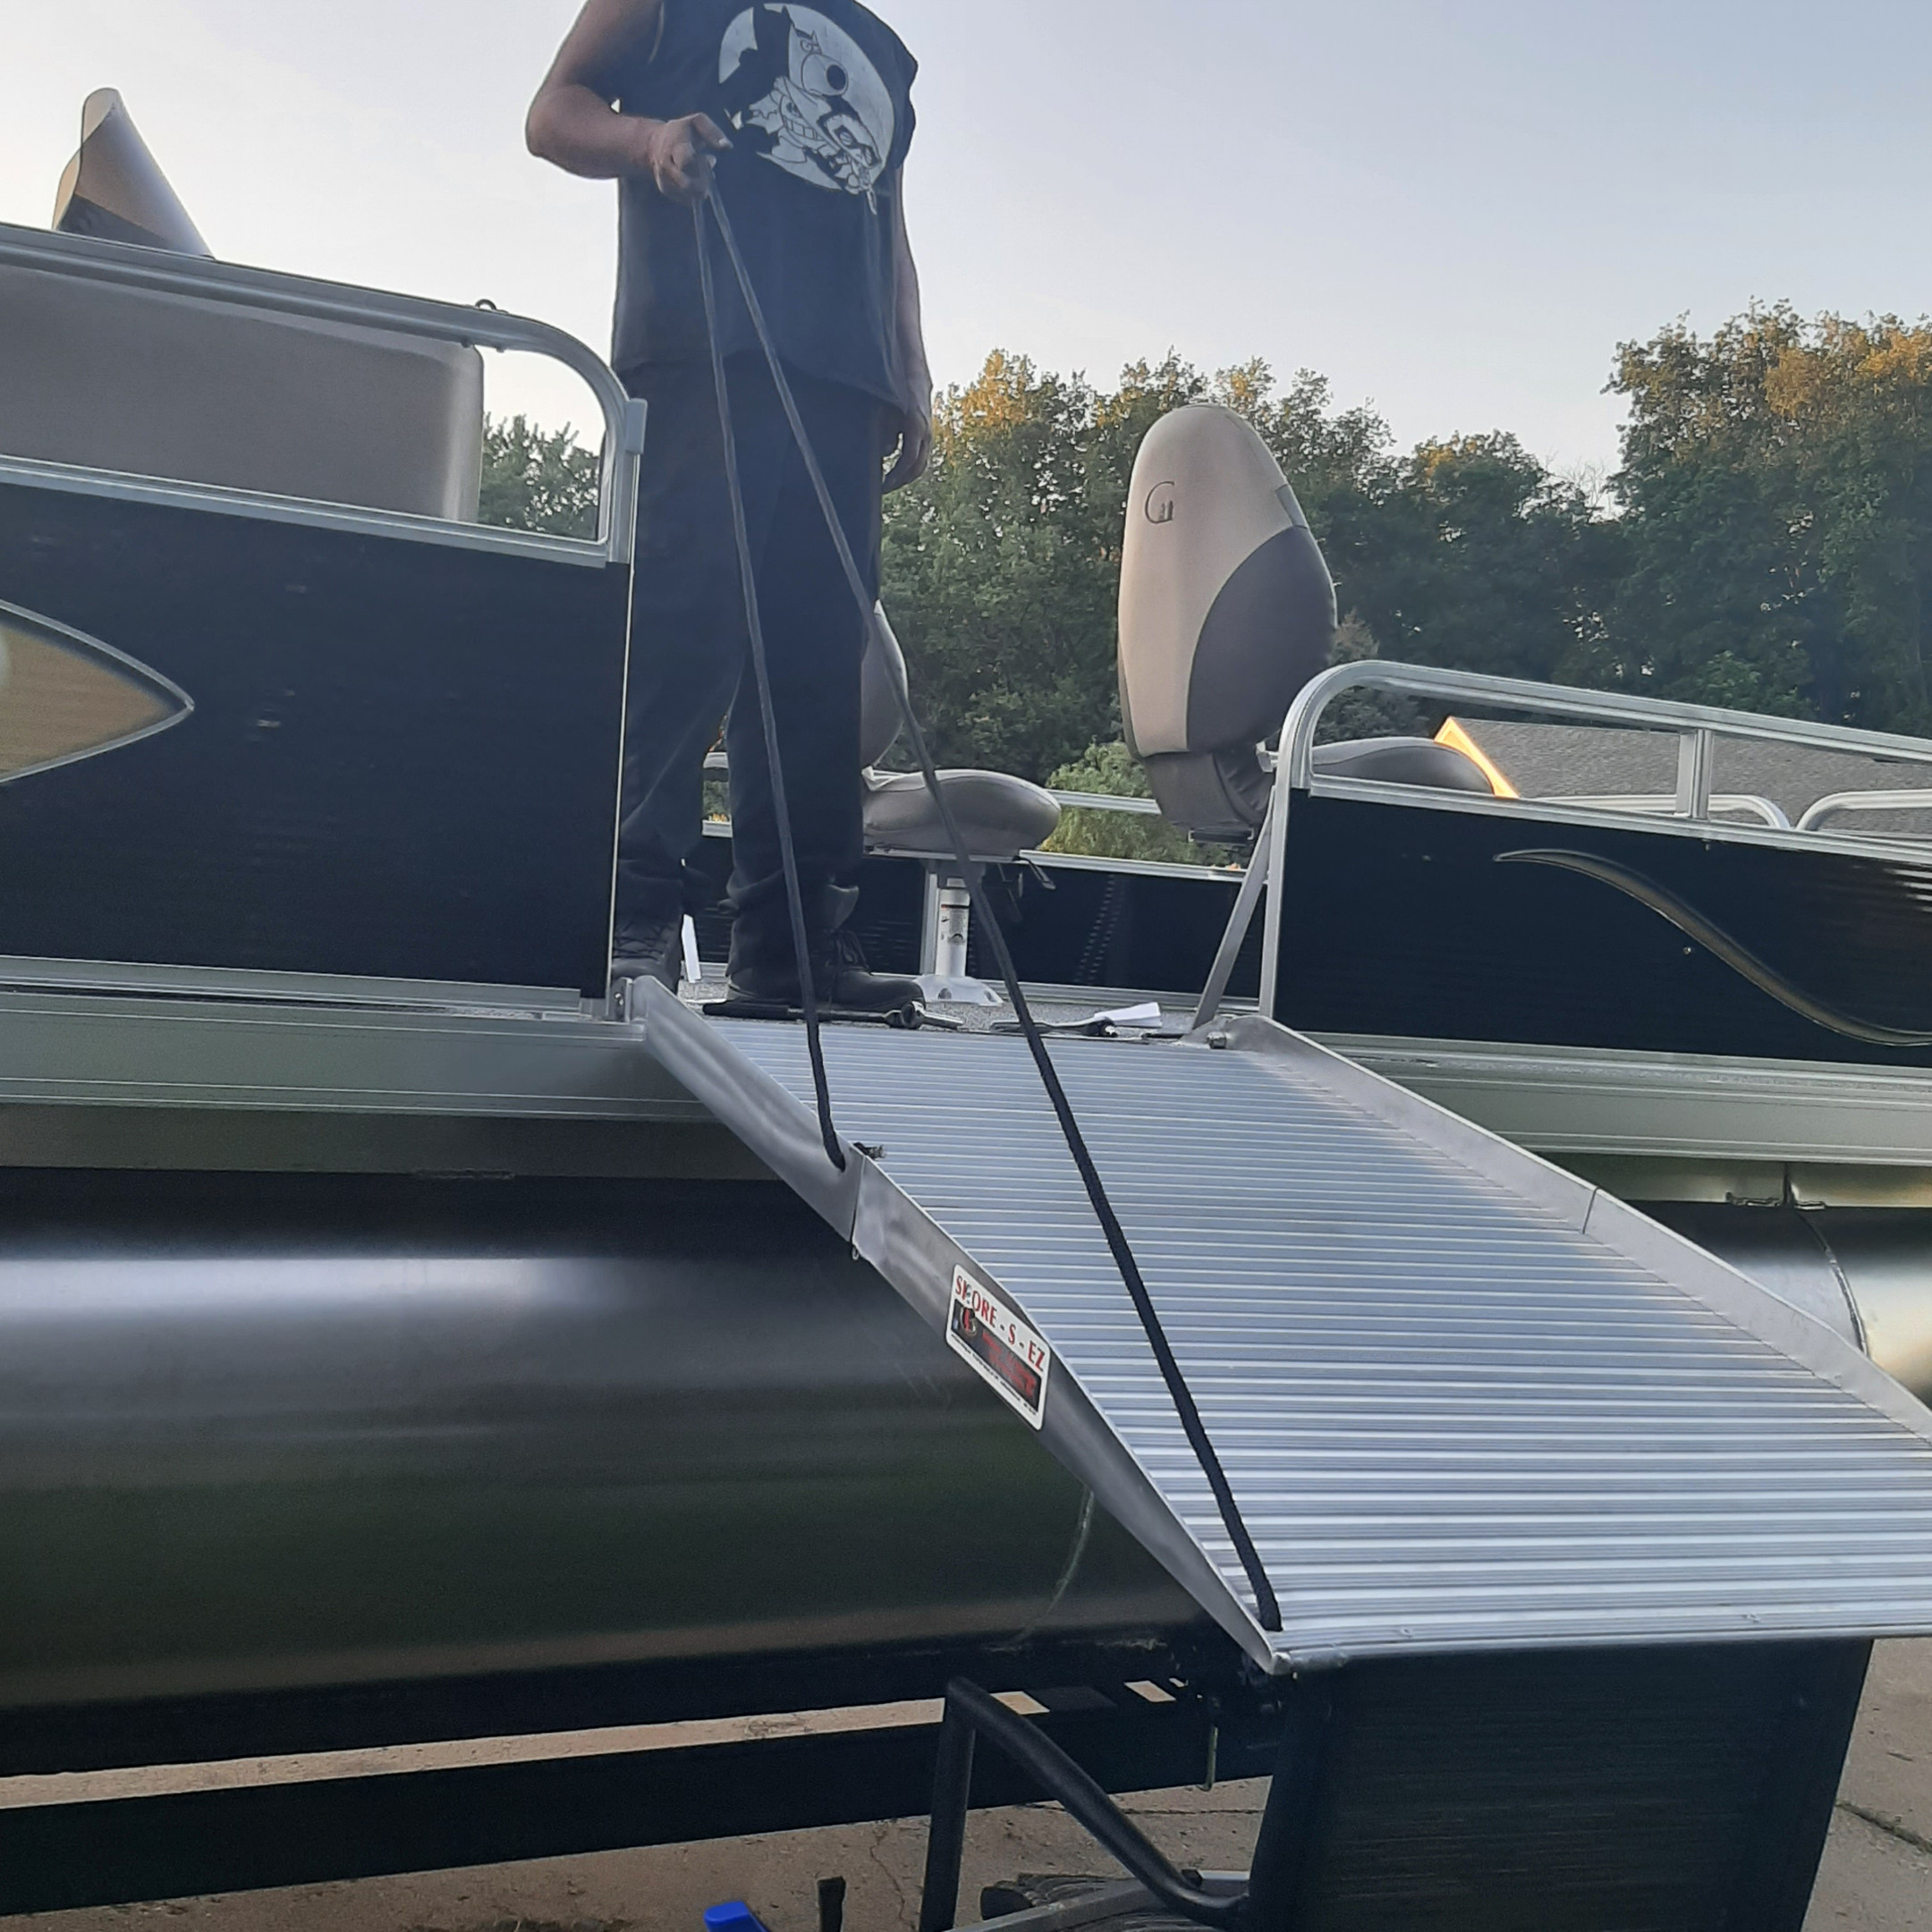 Wheelchair Accessible Pontoon Boat Chain-O-Lakes in Illinois